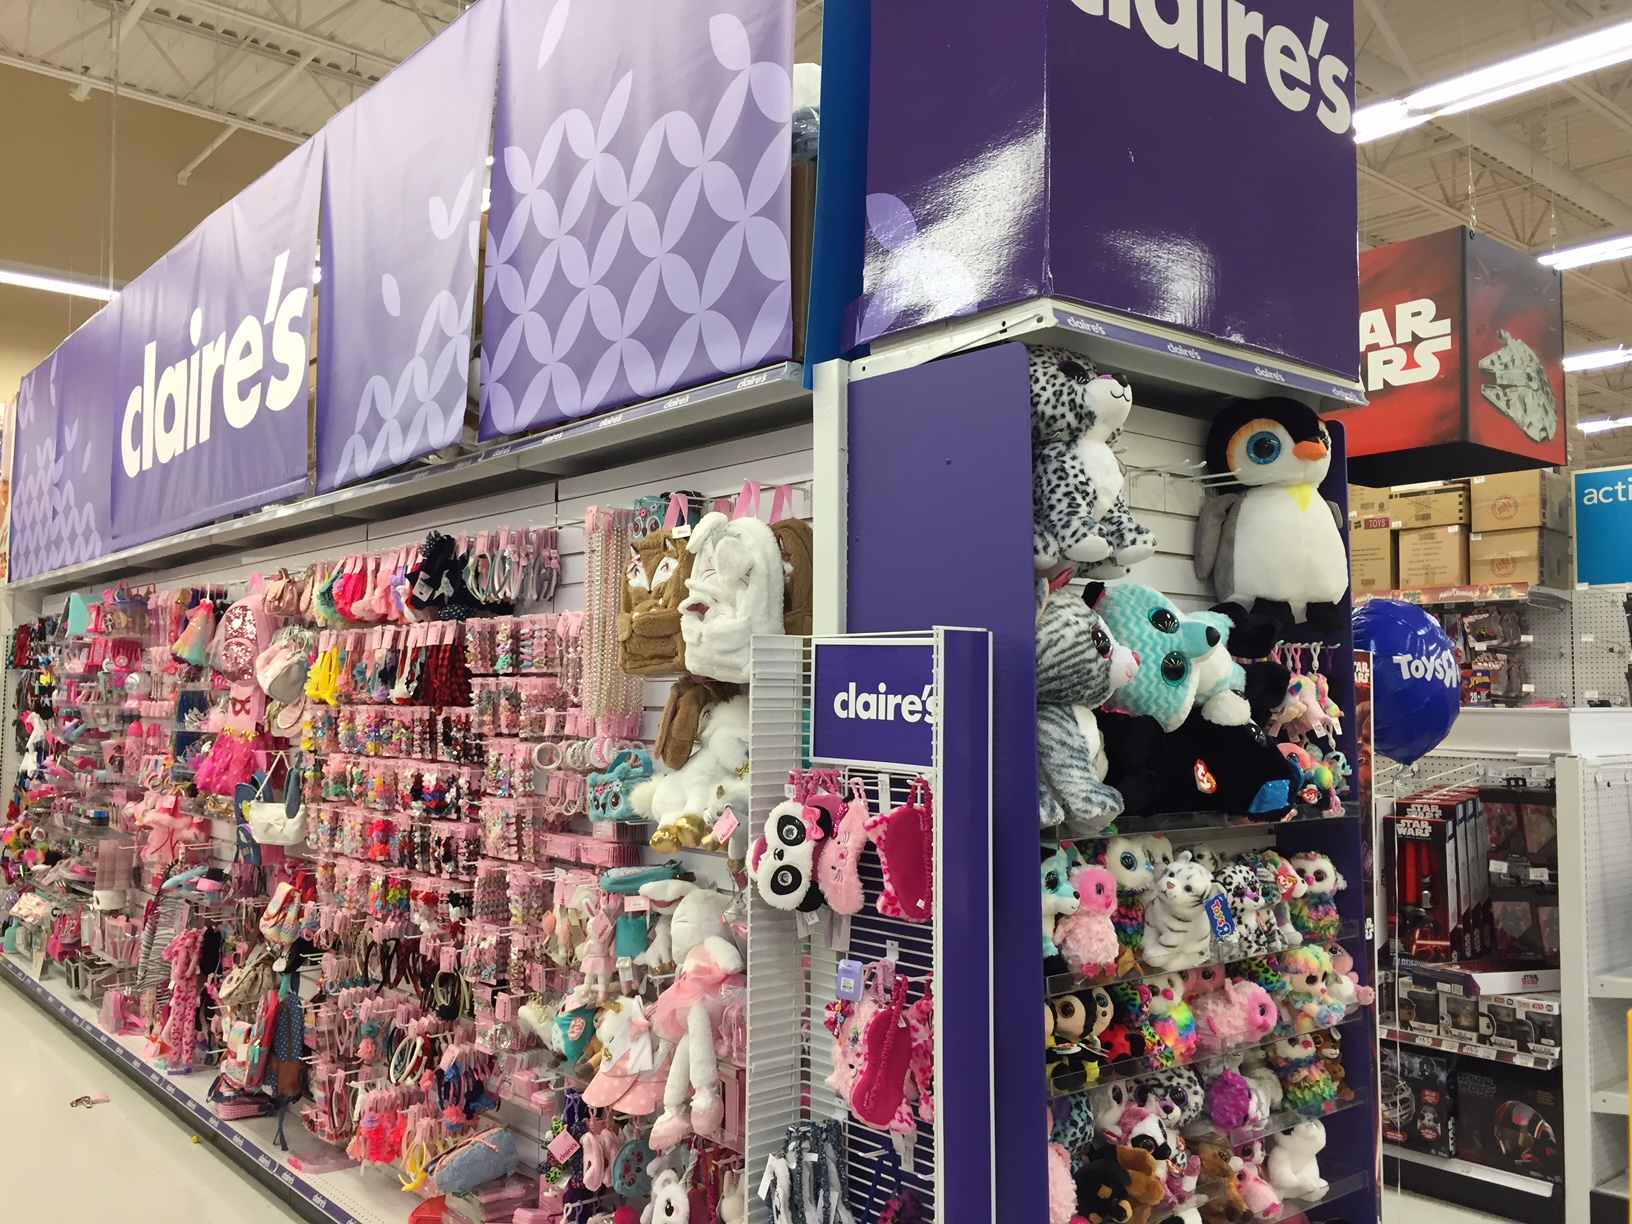 FDA issues warning for Claire's cosmetics that contain cancer